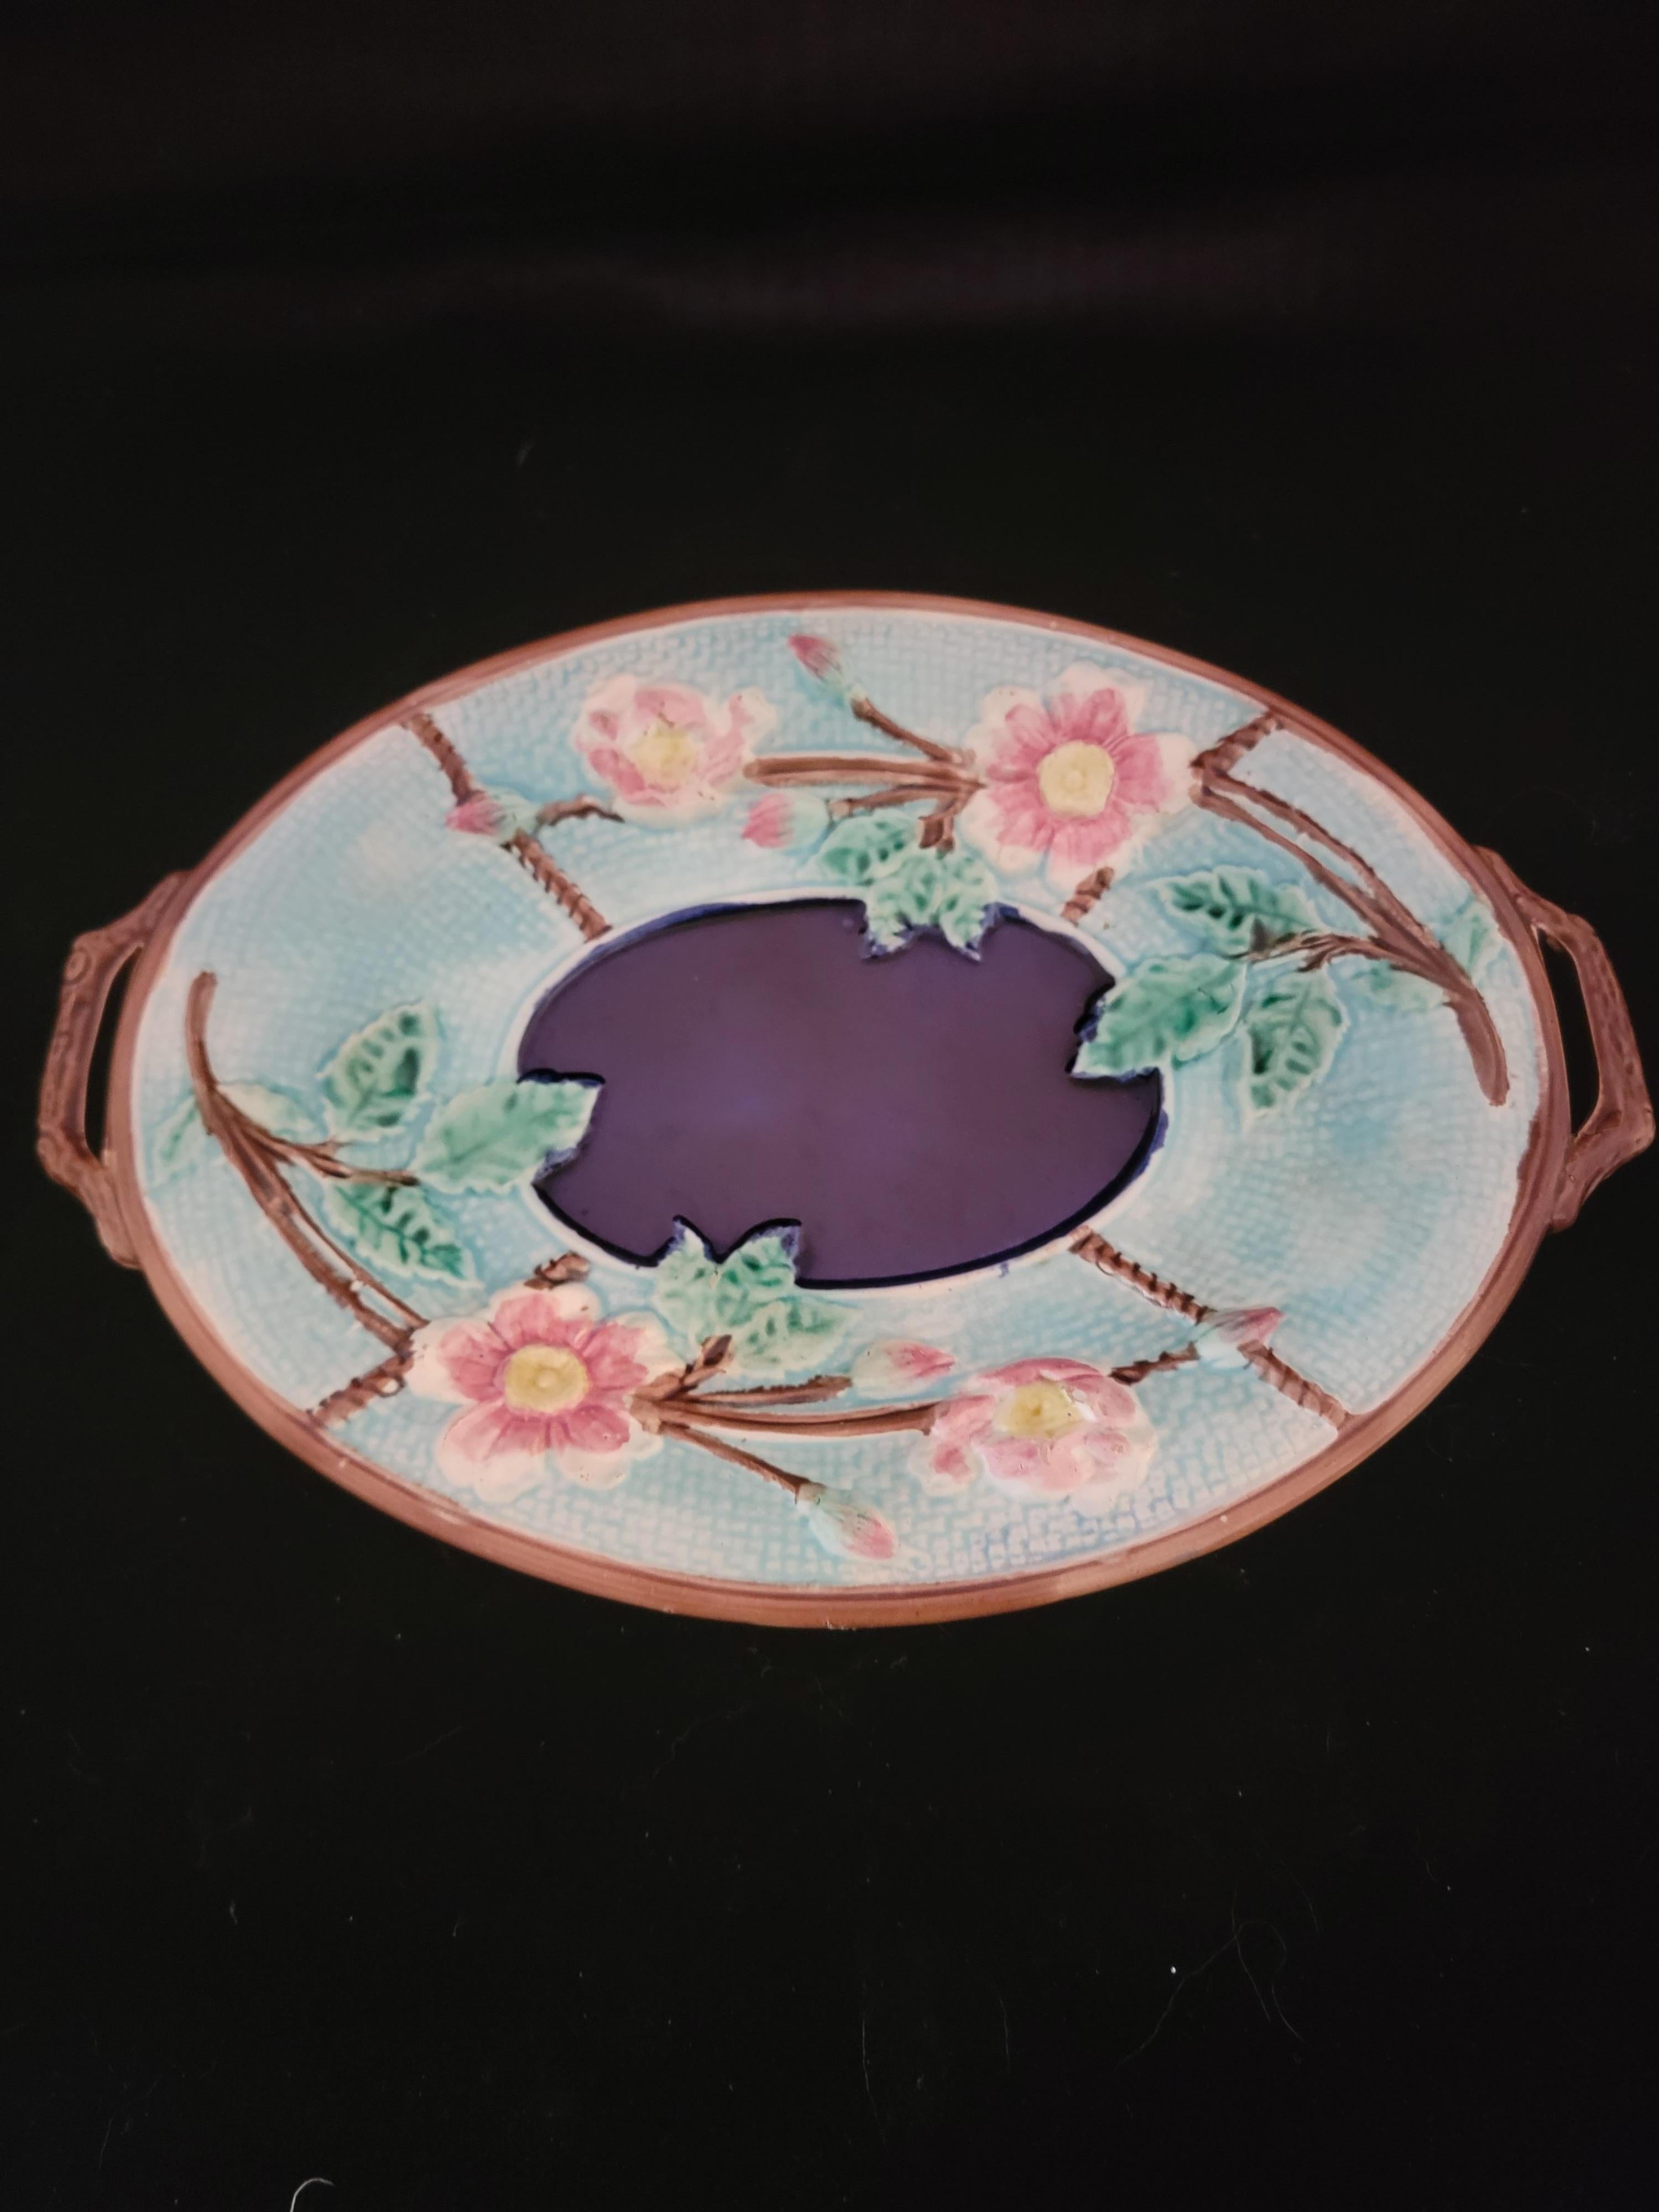 This majolica serving dish has several strong attributes. Akthough unattributed as it remains, it has strong color nd remarkable sharpness when viewed from a distant in your collection. It has presence, great form and wonderful color application. It